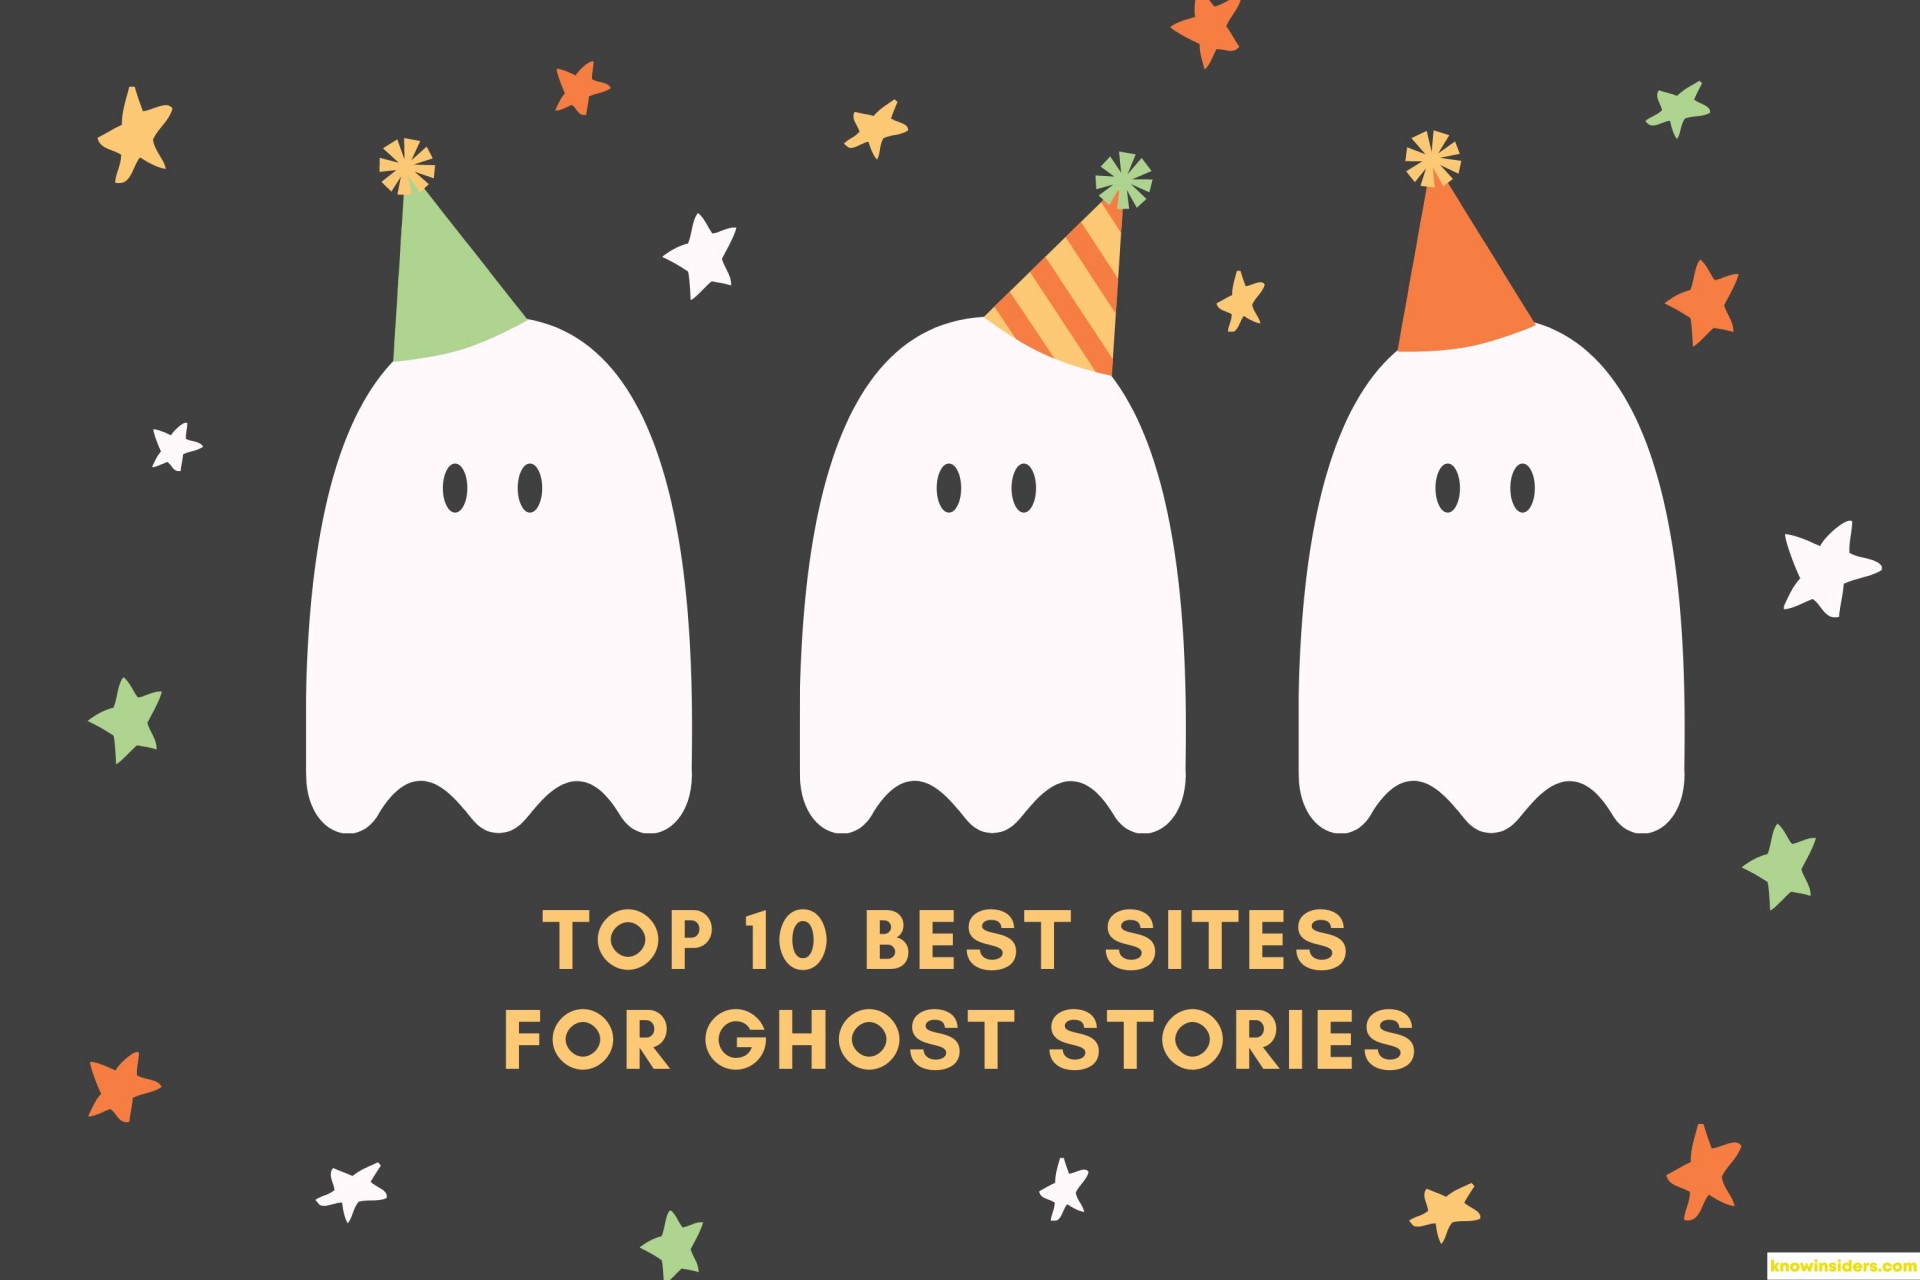 Top 10 Best Free Sites to Read the Ghost Stories